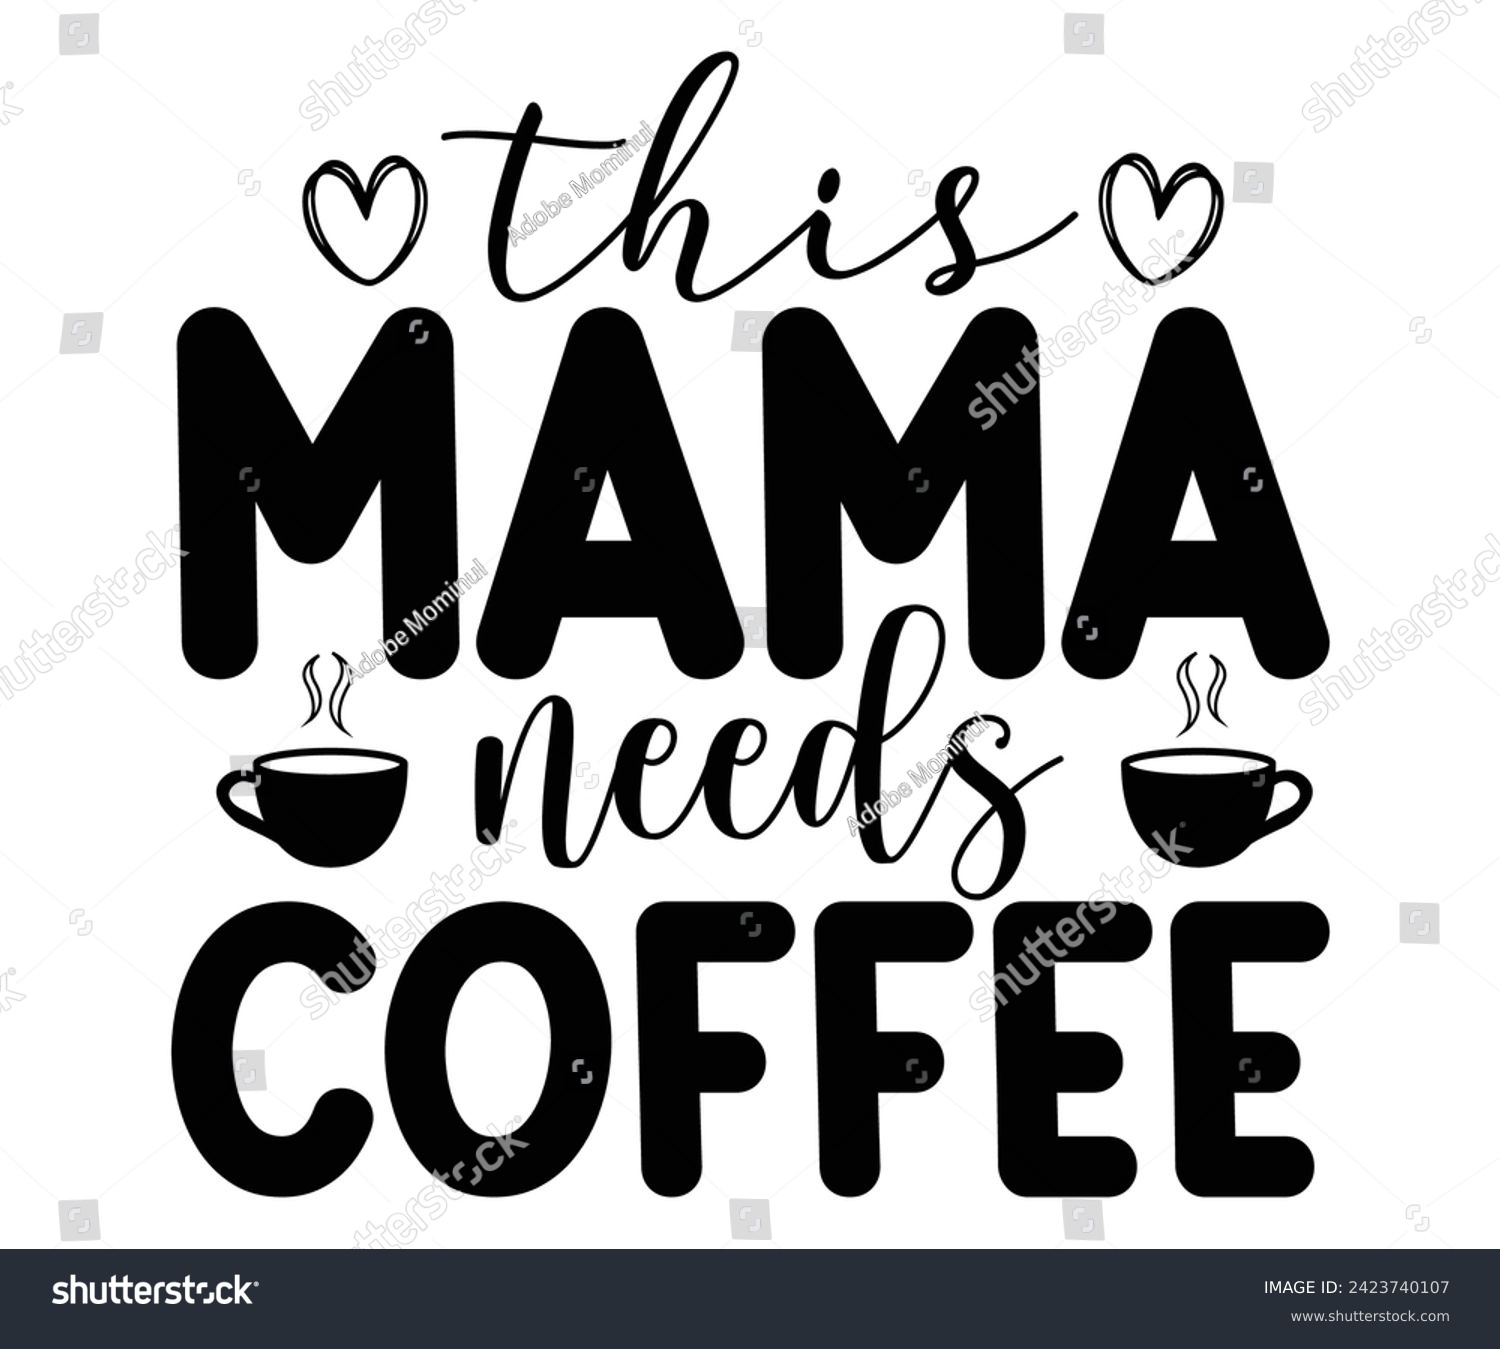 SVG of This Mama Needs Coffee Svg,Coffee Svg,Coffee Retro,Funny Coffee Sayings,Coffee Mug Svg,Coffee Cup Svg,Gift For Coffee,Coffee Lover,Caffeine Svg,Svg Cut File,Coffee Quotes,Sublimation Design, svg